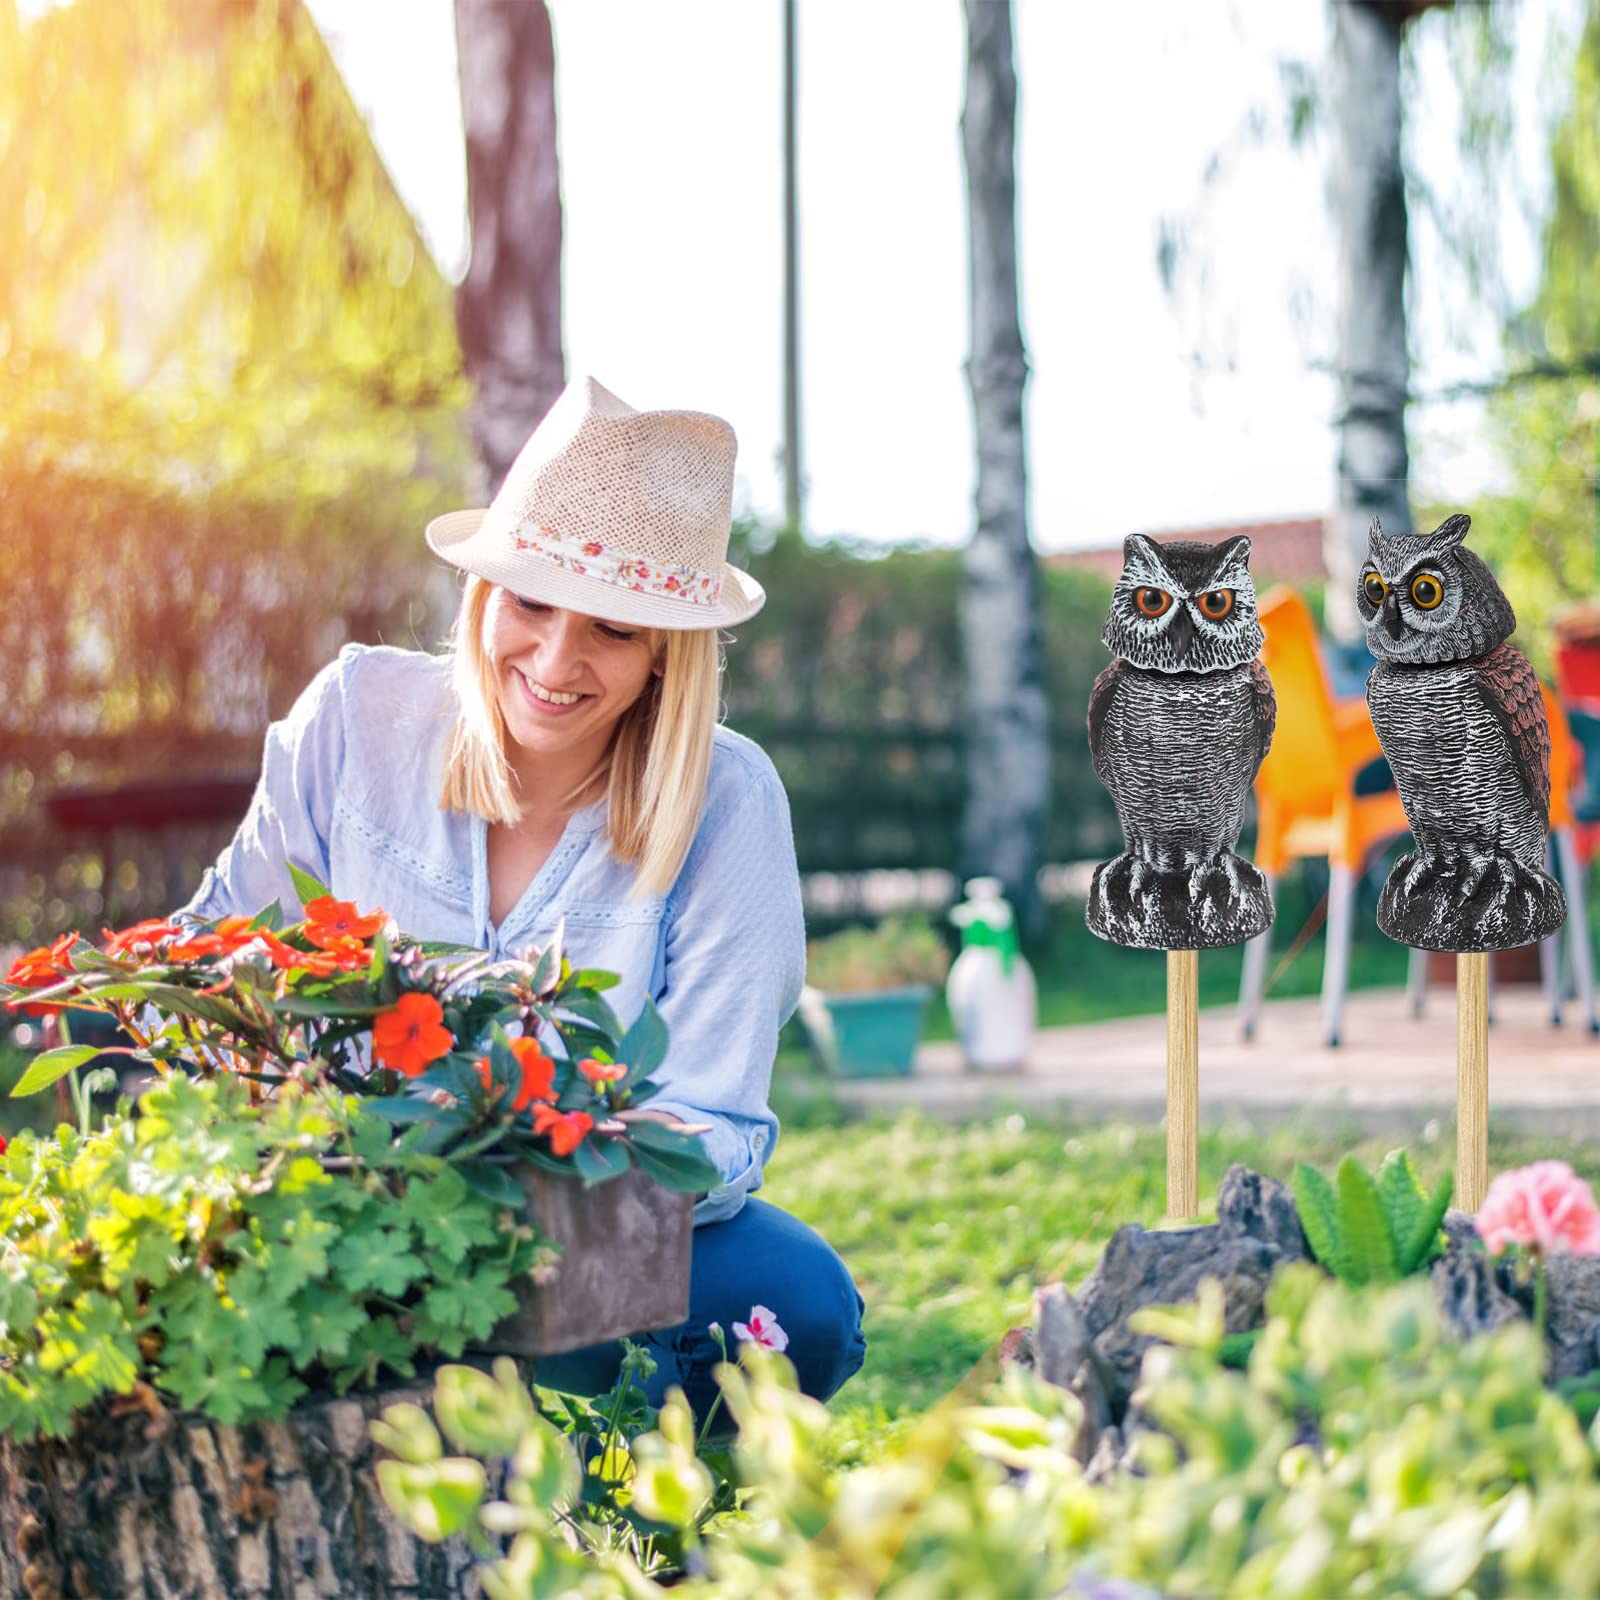 Hedoc 2 Pack Fake Owl Decoys to Scare Birds Away from Gardens and Patios, Rotating Head Owl Bird Deterrents, Nature Enemy Scarecrow Plastic Owl Statues, Pest Repellent, Pigeon Deterrent